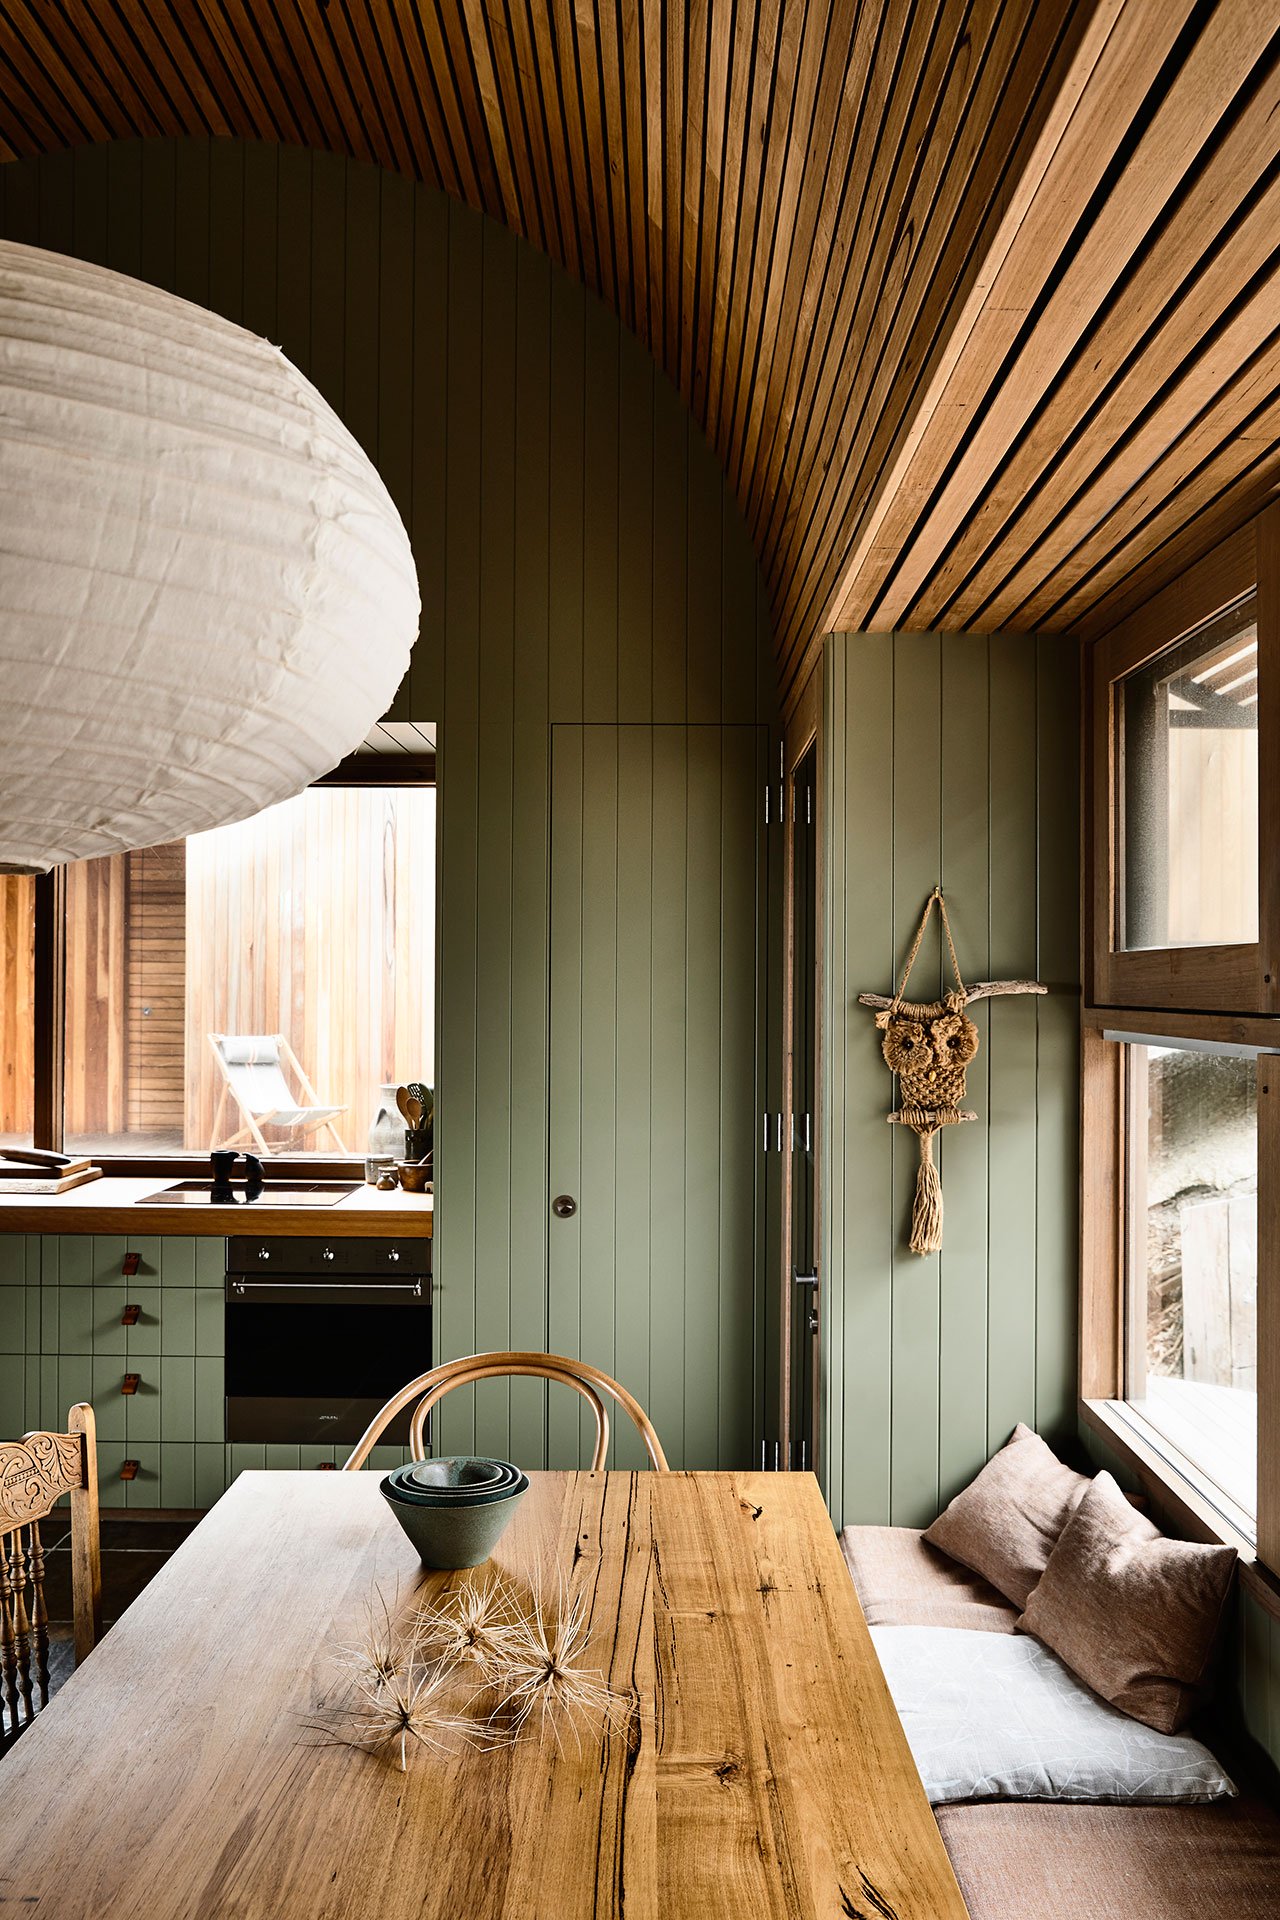 The kitchen and dining room are united into one space also clad with sage green wood and with matching furniture